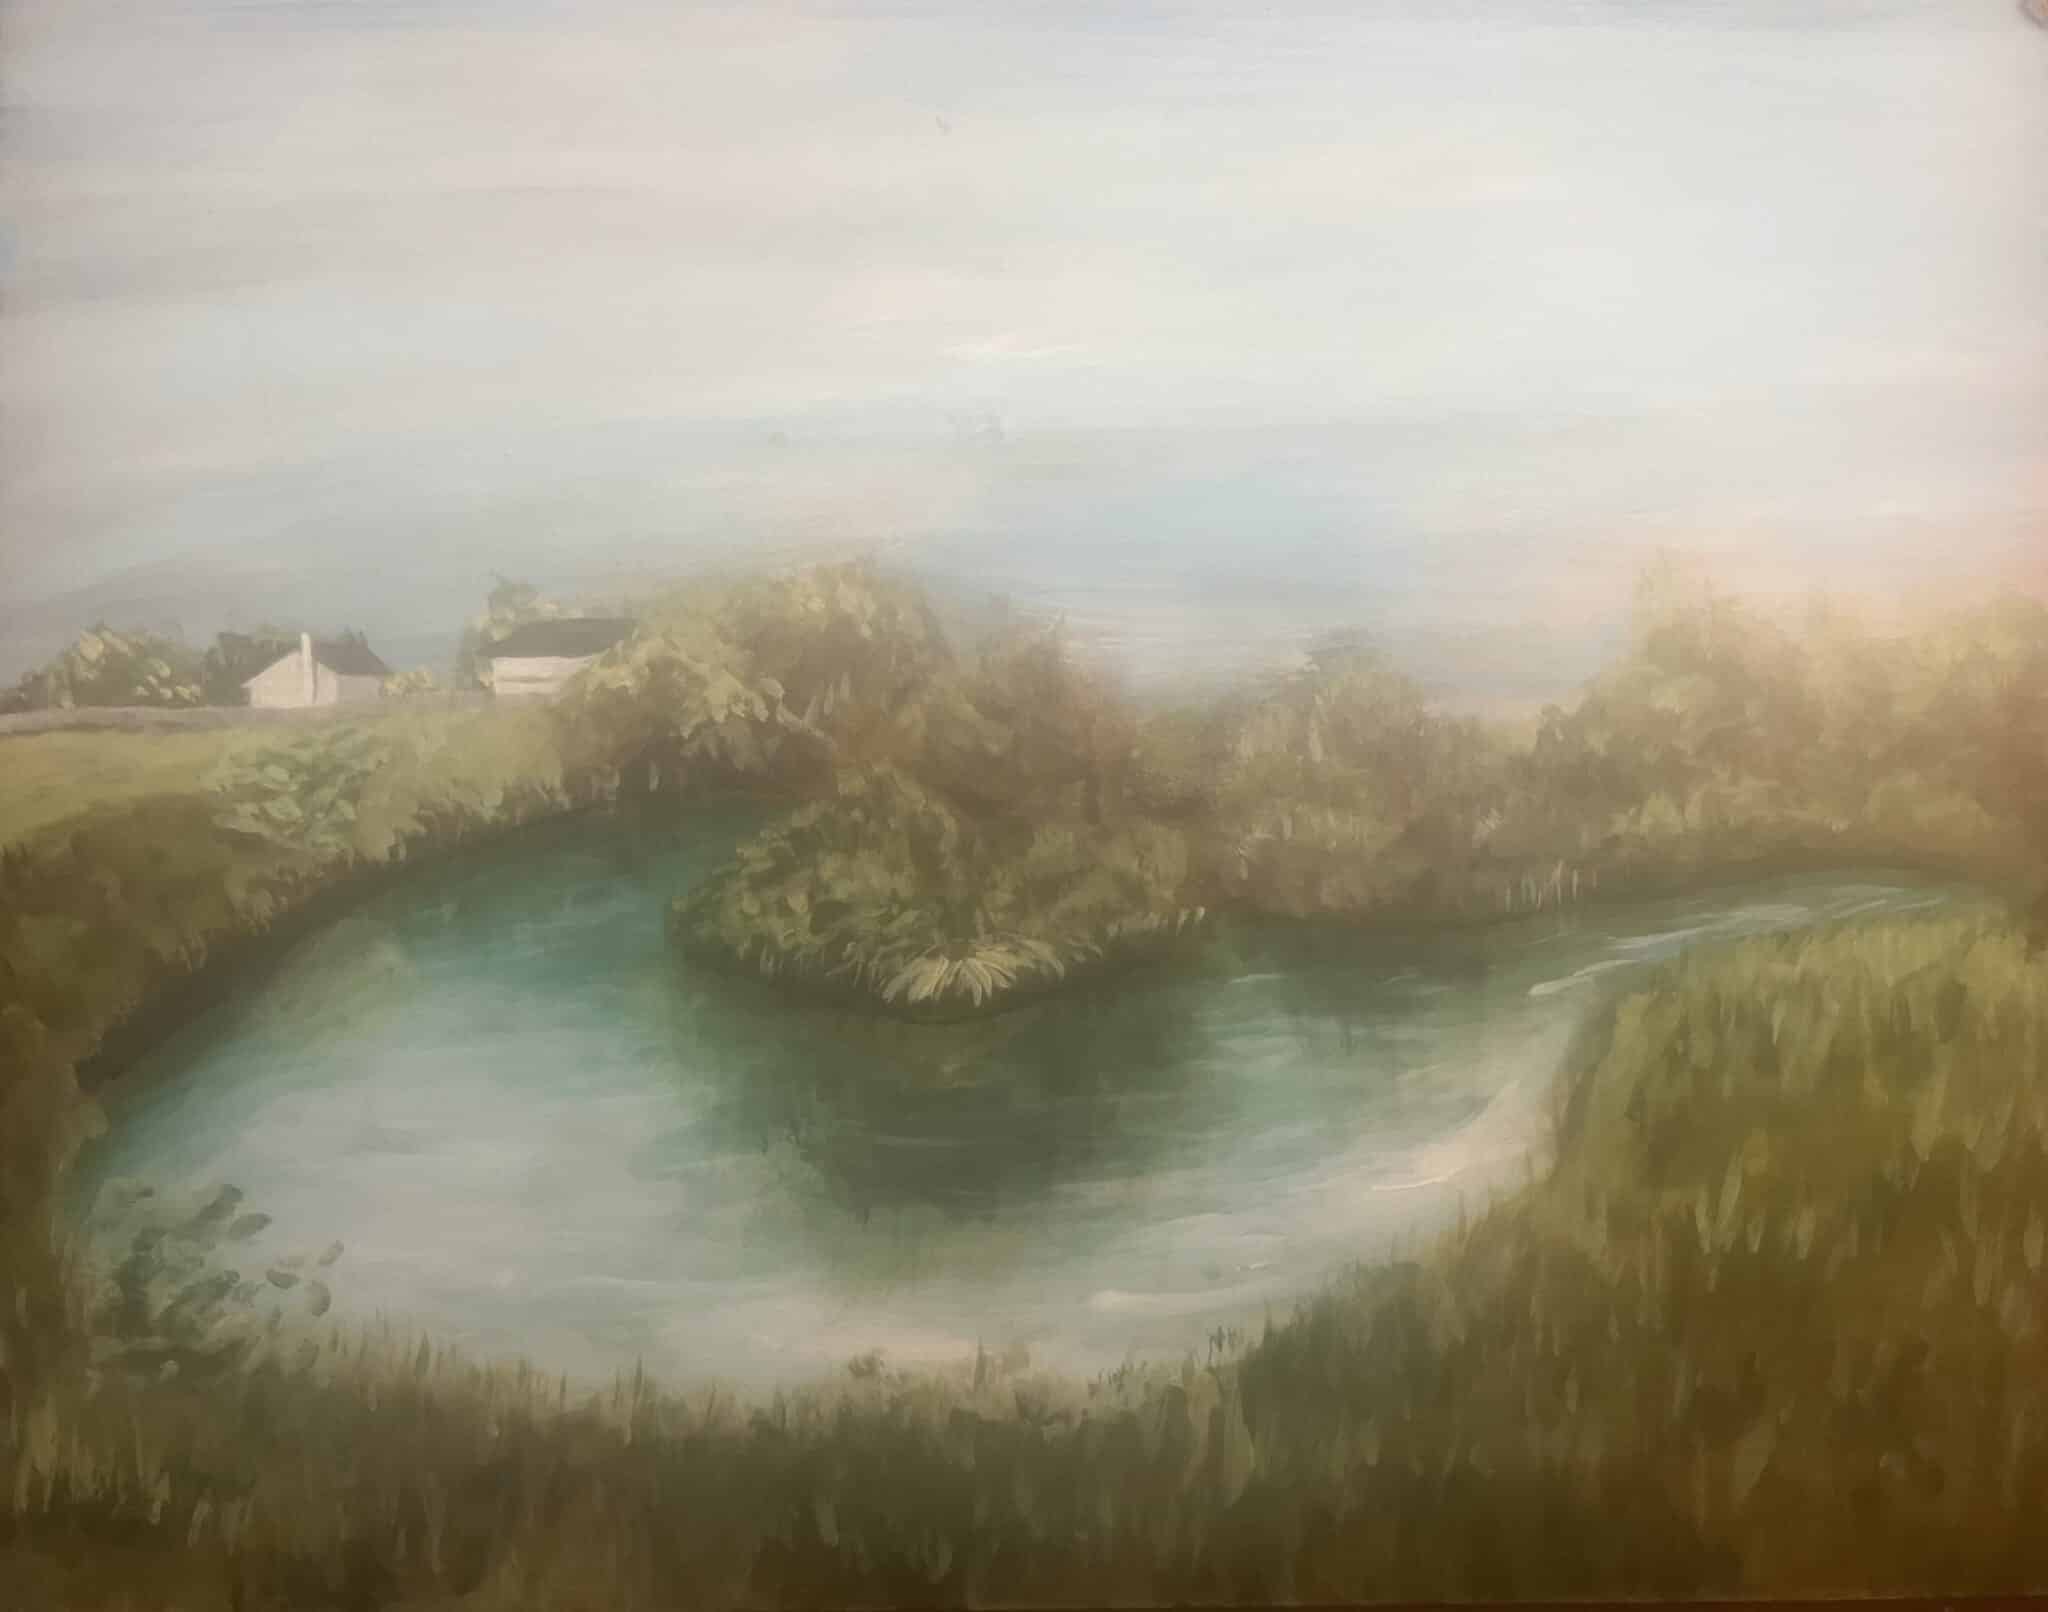 A copy of SCA Senior Sarah Woodall’s Missouri Senate District 8 Art Contest winning acrylic painting “Foggy” will hang in the Senate hallway gallery from April 2024 to March 2025.